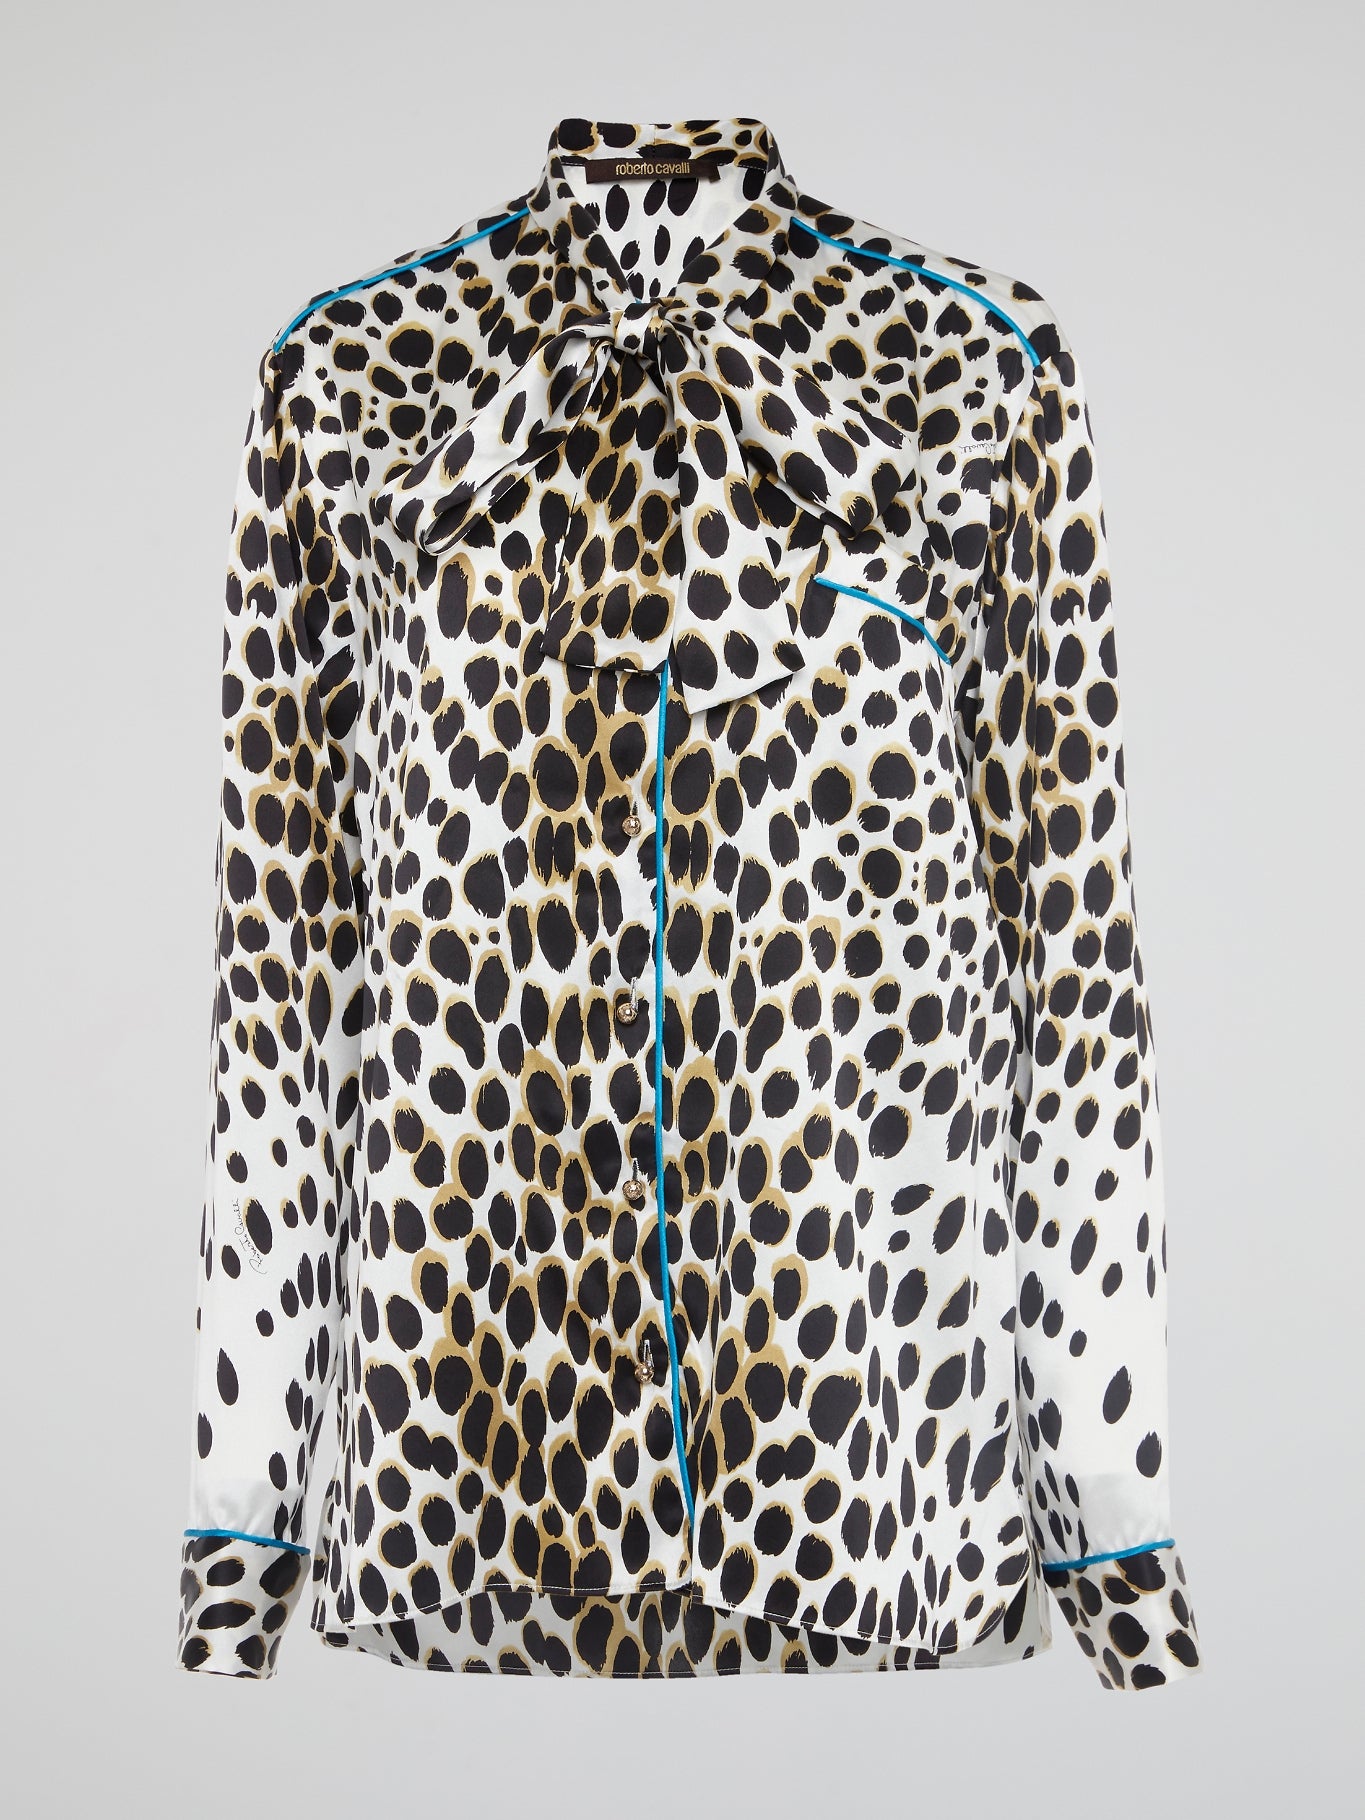 Unleash your wild side with this fierce Leopard Print Bow Tie Blouse by Roberto Cavalli. Embrace your inner fashionista with this bold statement piece that is sure to turn heads wherever you go. Add a touch of glamour and sophistication to your wardrobe with this unique and trendy top that exudes confidence and style.